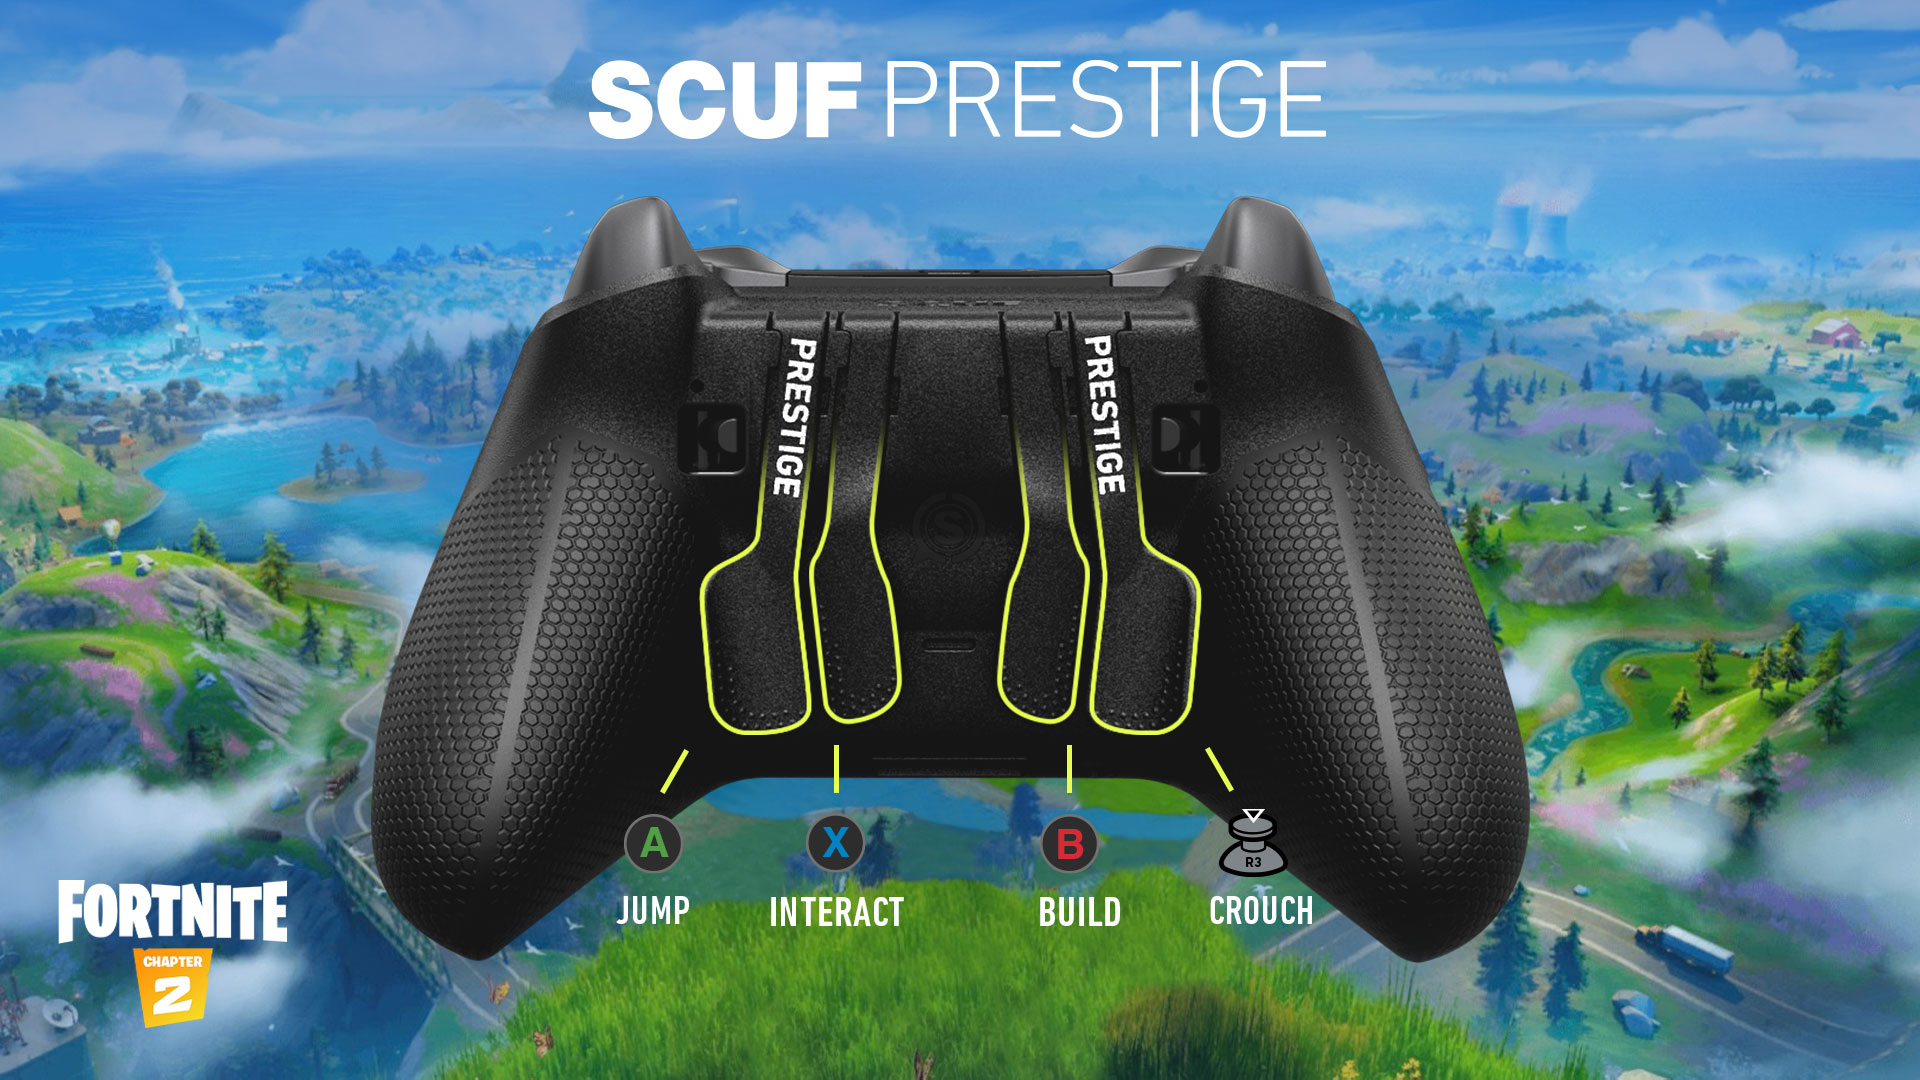 Top Controller Setups For Fortnite Scuf Gaming